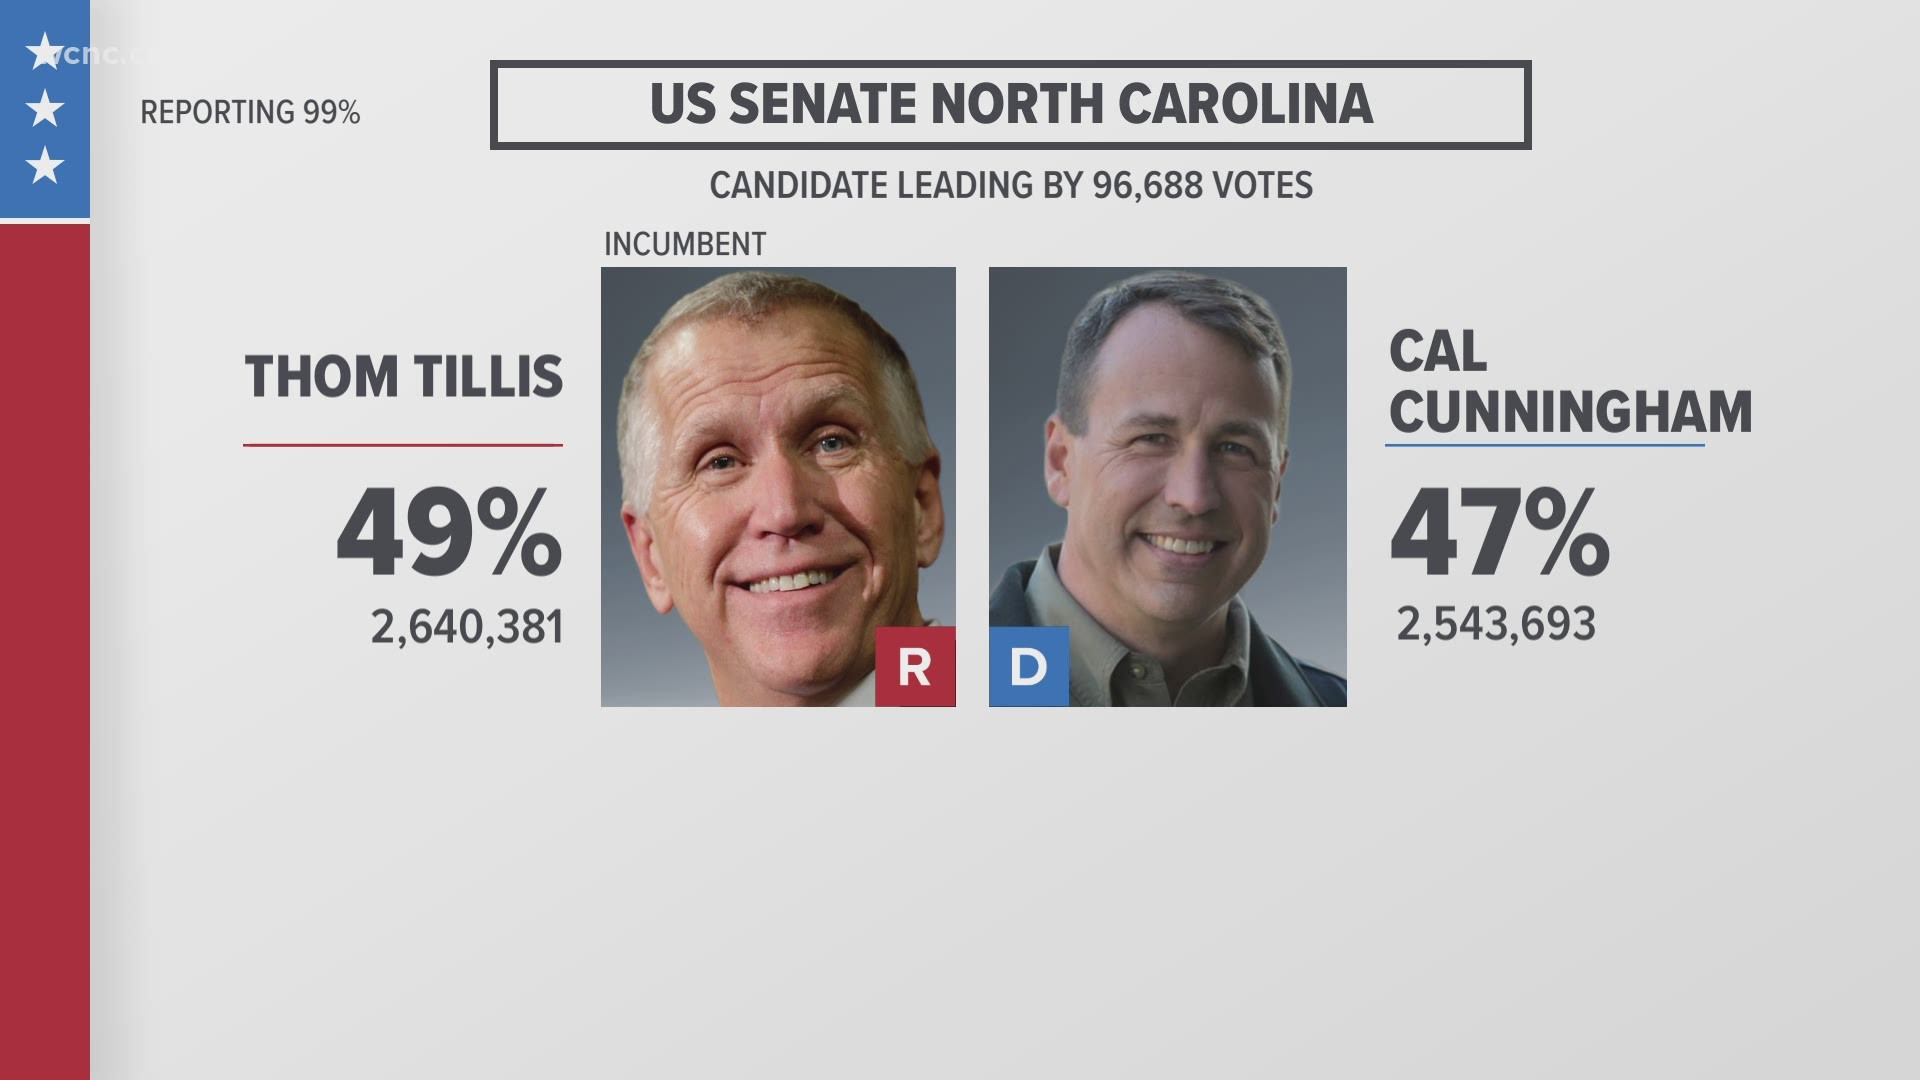 Thom Tillis and Cal Cunningham are one of the closest races in the Carolinas.